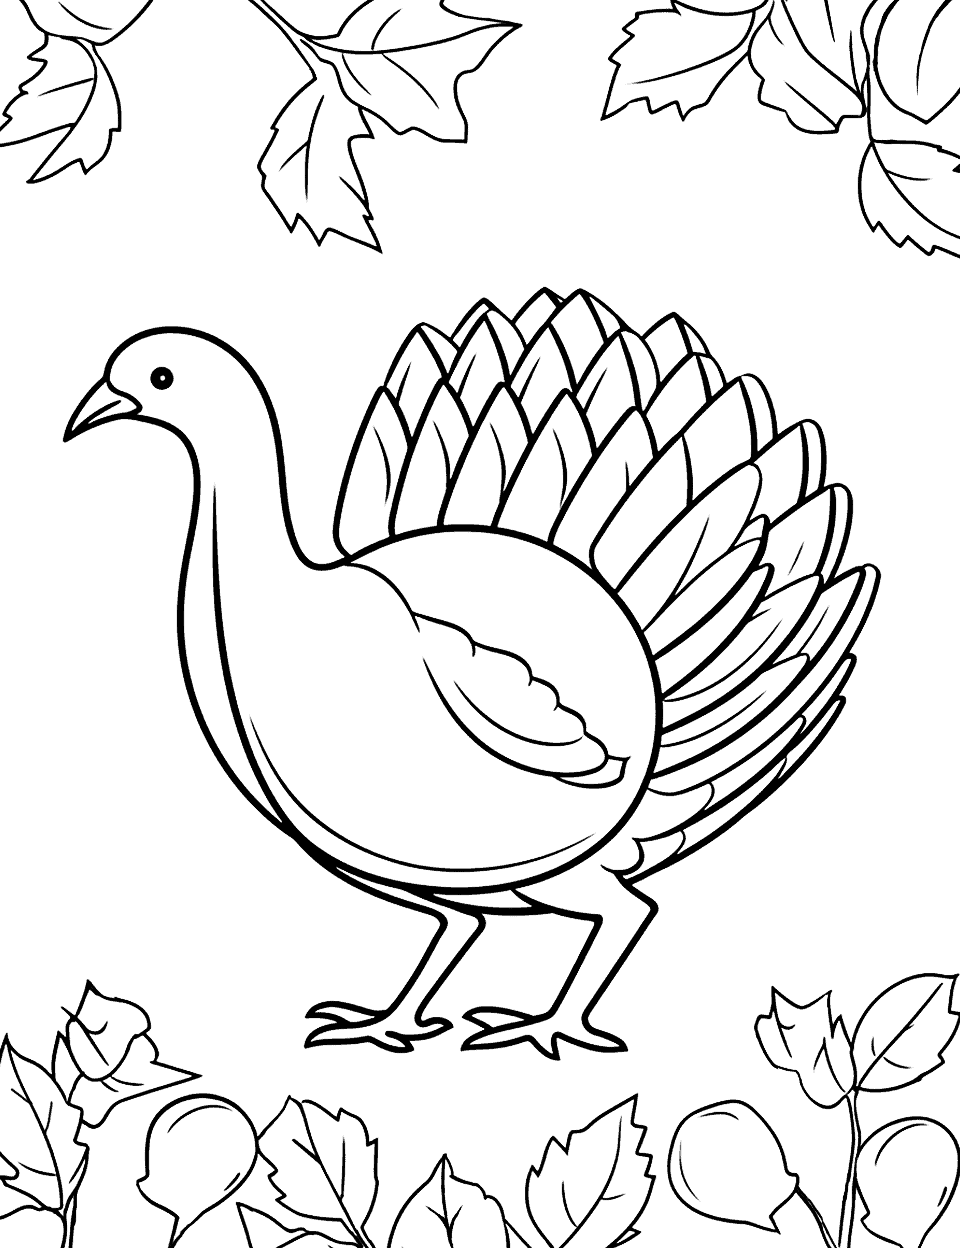 Thanksgiving Turkey Drawing Fall Coloring Page - An interactive coloring page where children can draw and color their own Thanksgiving turkey.